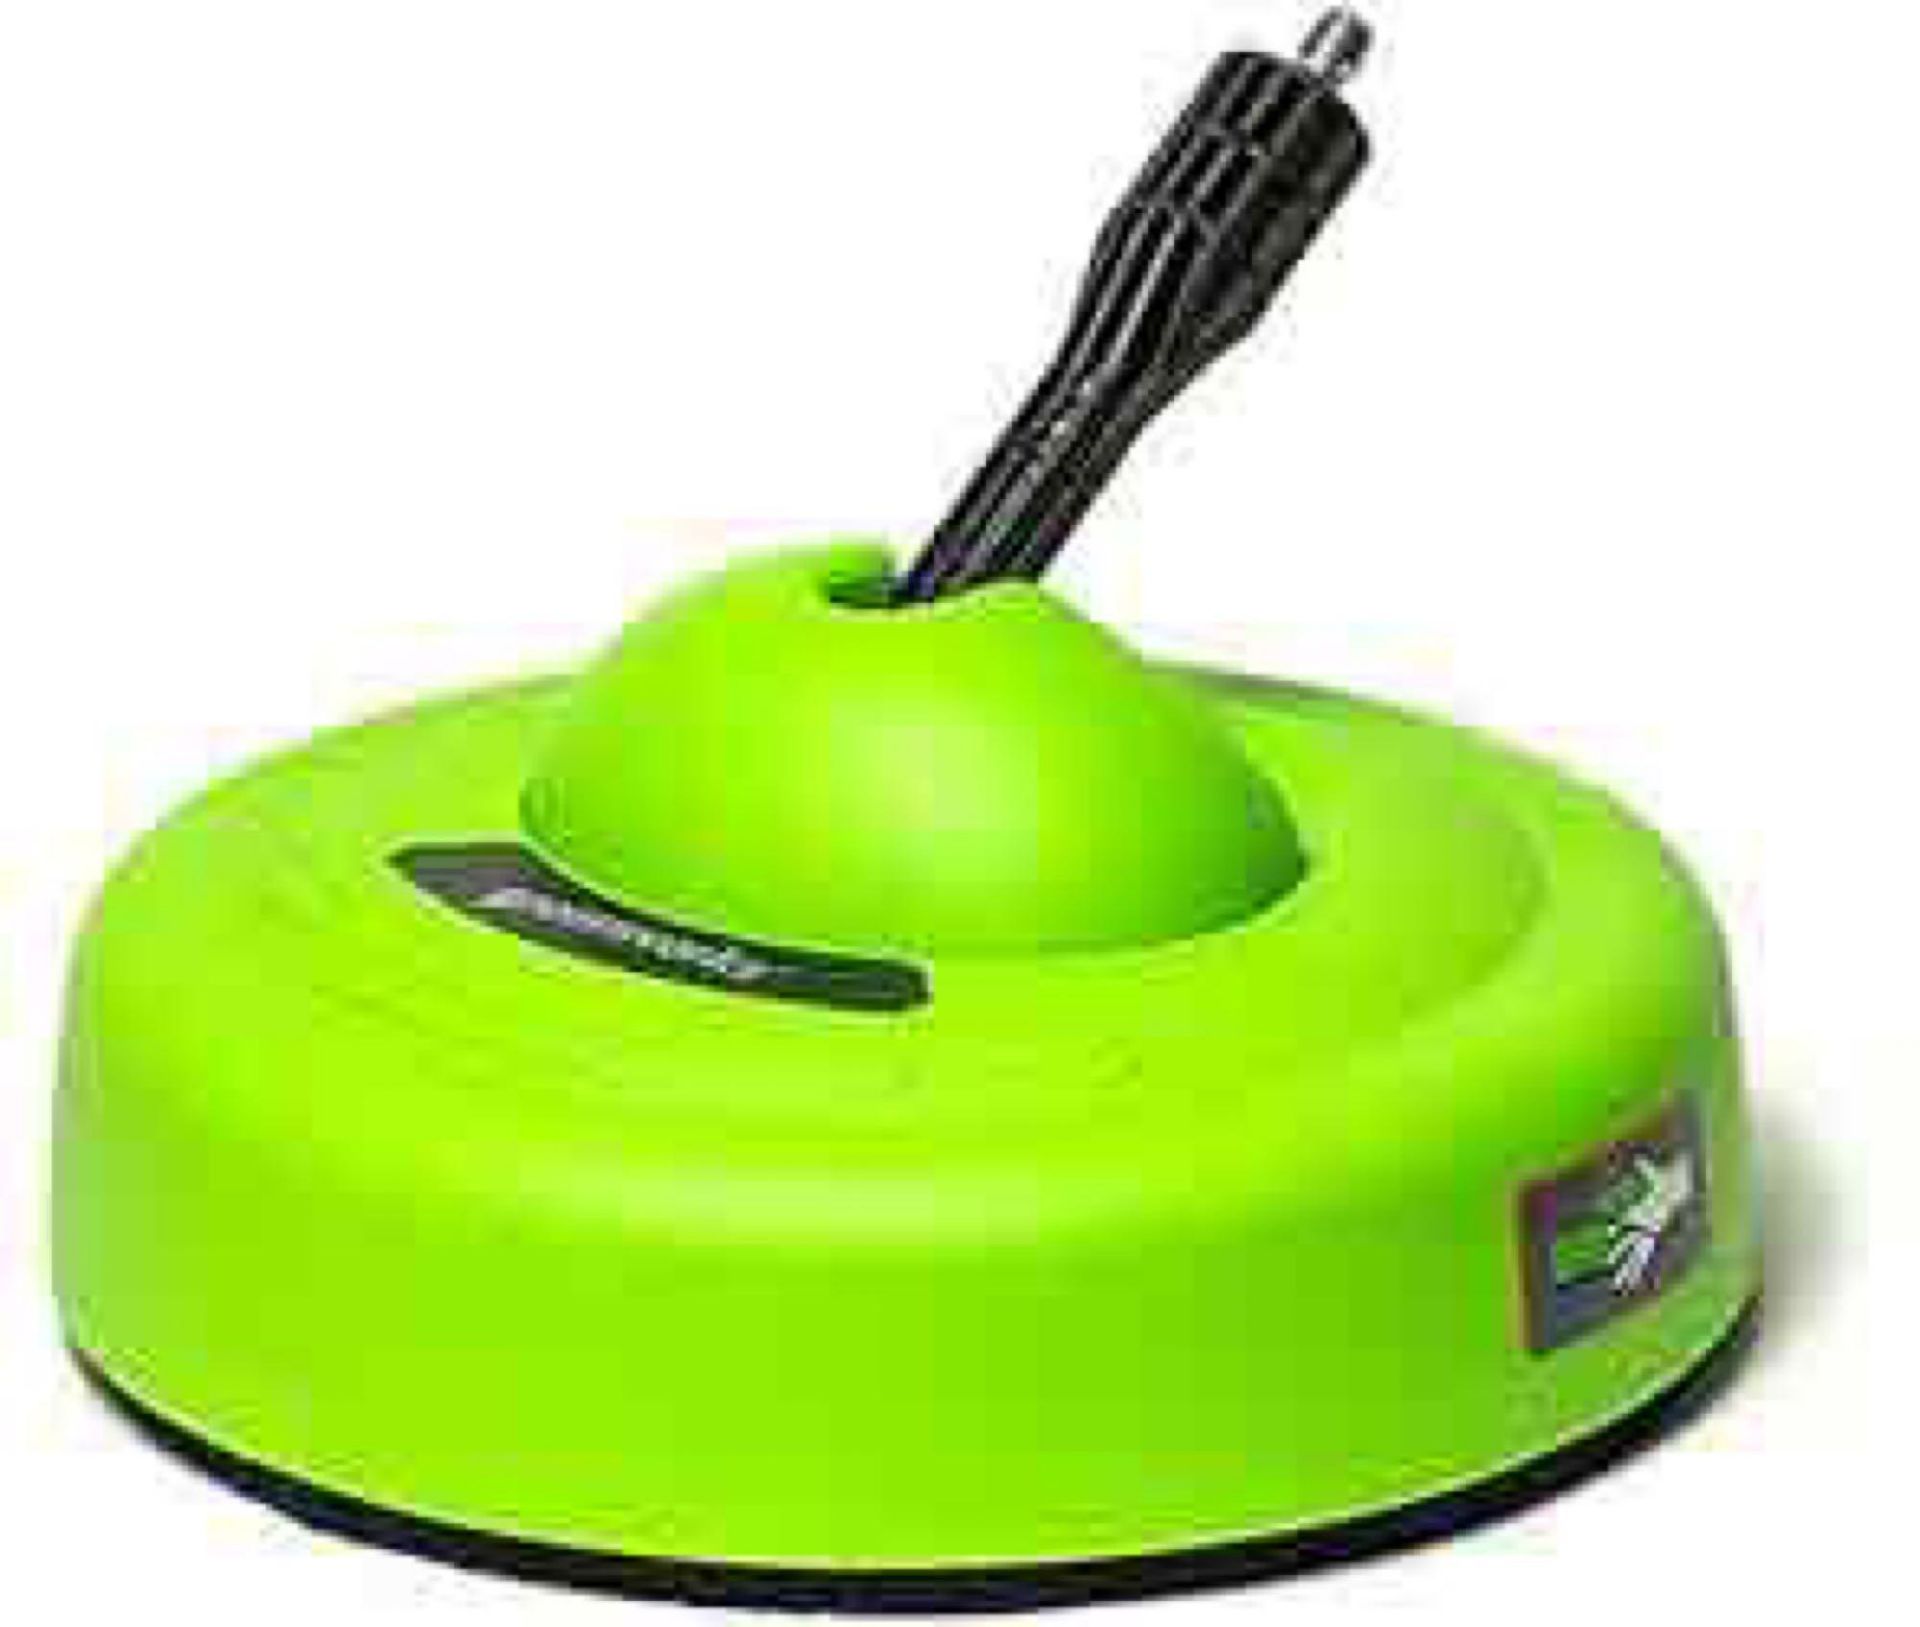 bOXED bGreen works patio cleaner RRP£19.99